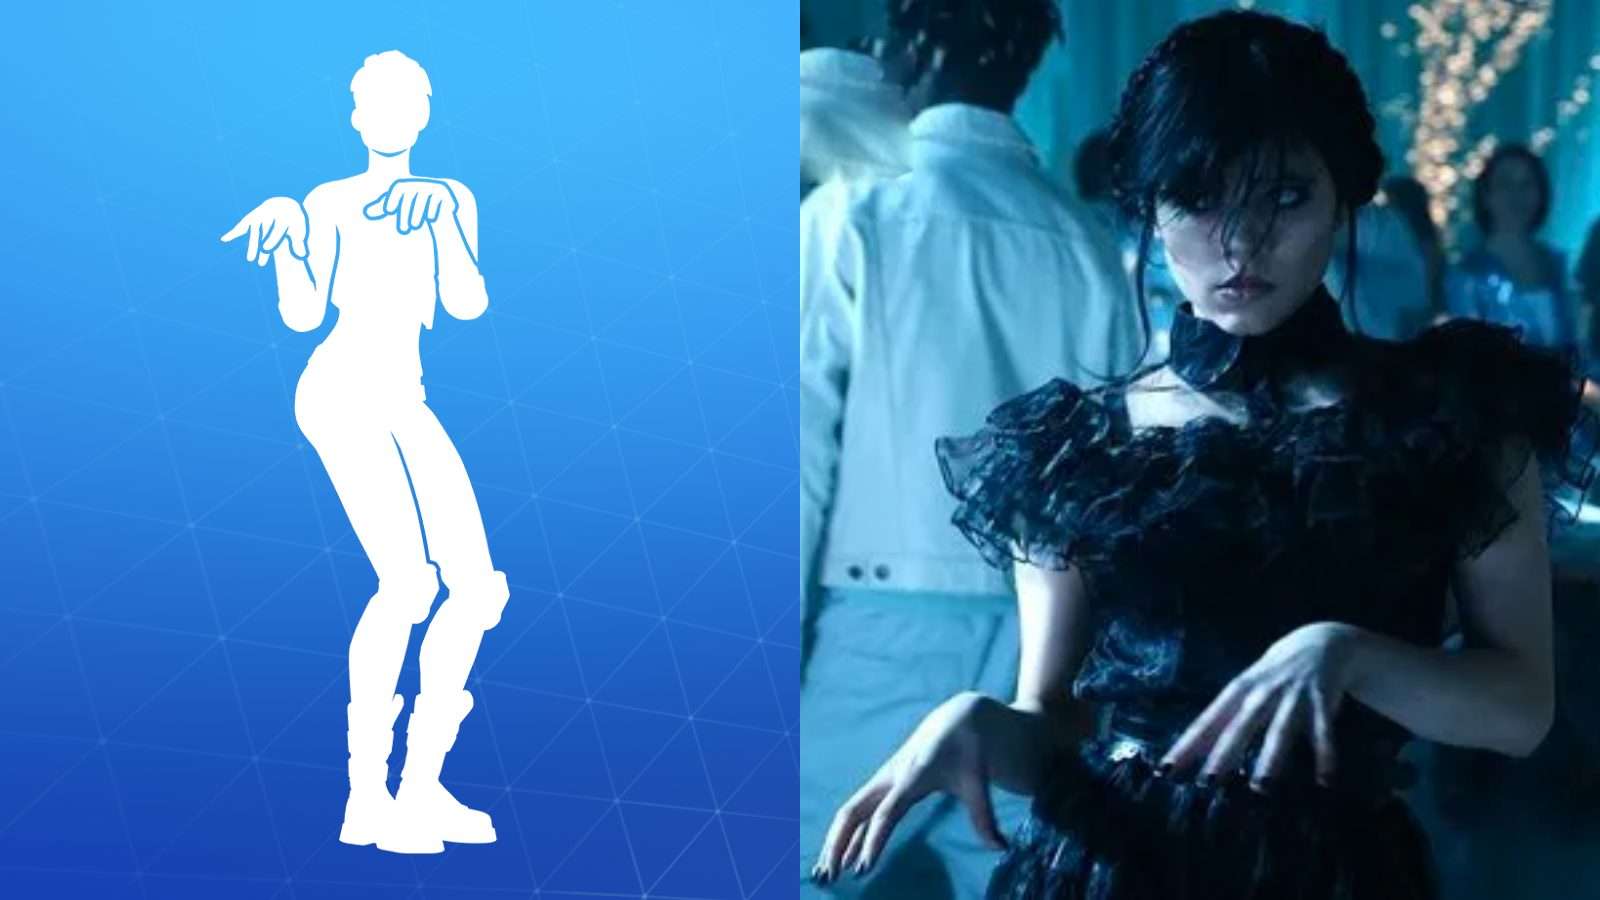 Fortnite Emote side by side comparison with Jenna Ortega performing the dance from Wednesday show.